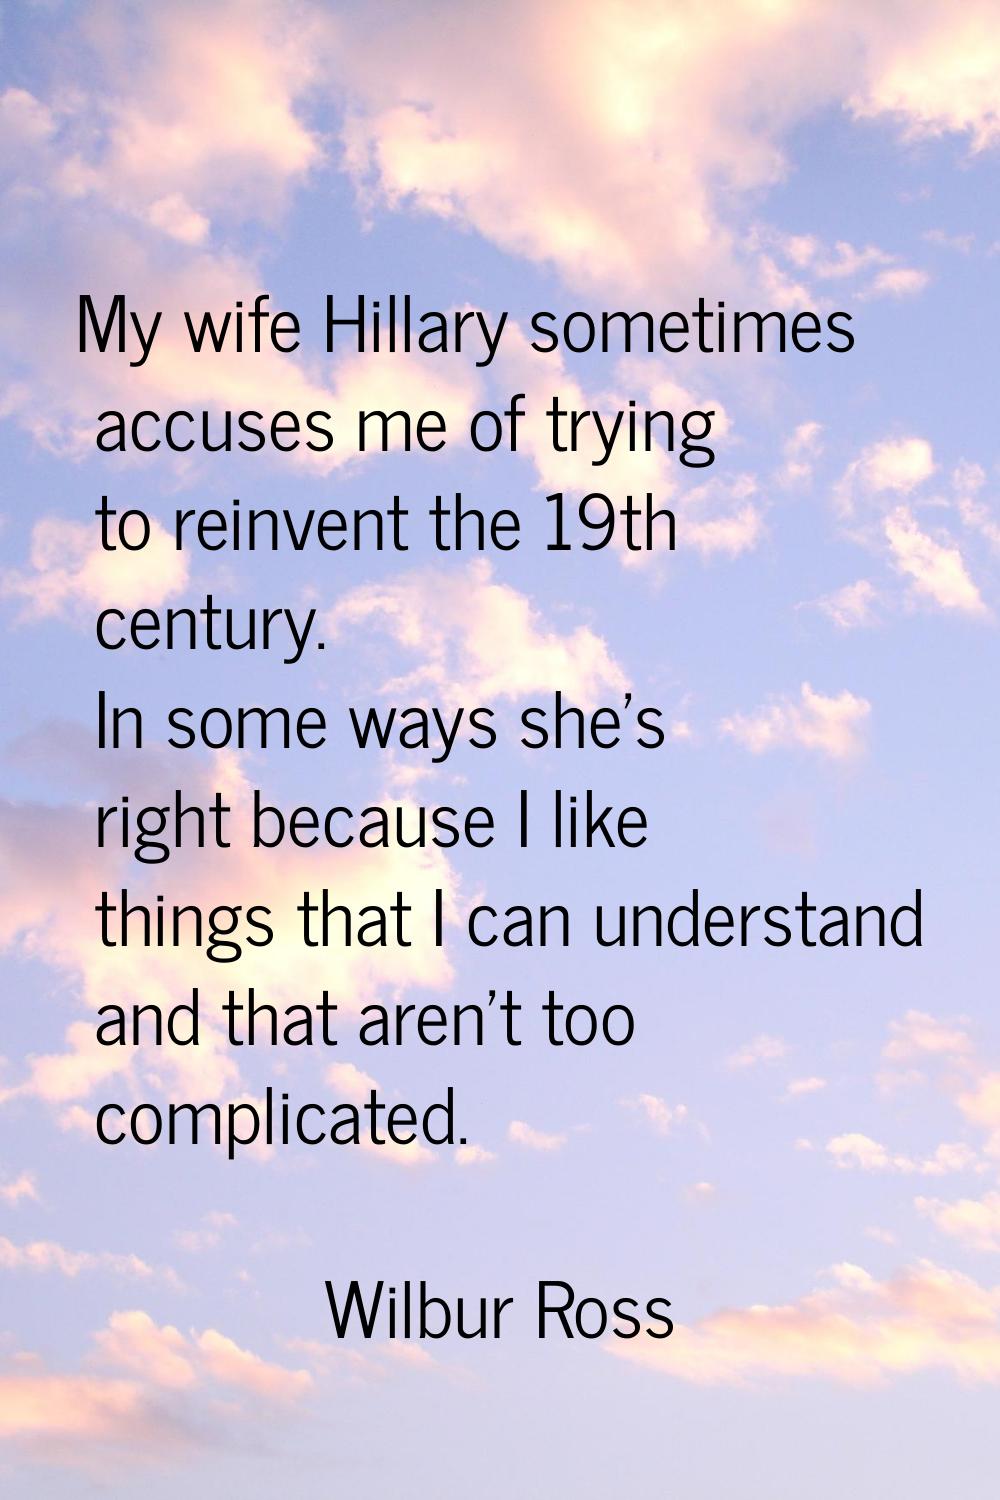 My wife Hillary sometimes accuses me of trying to reinvent the 19th century. In some ways she's rig